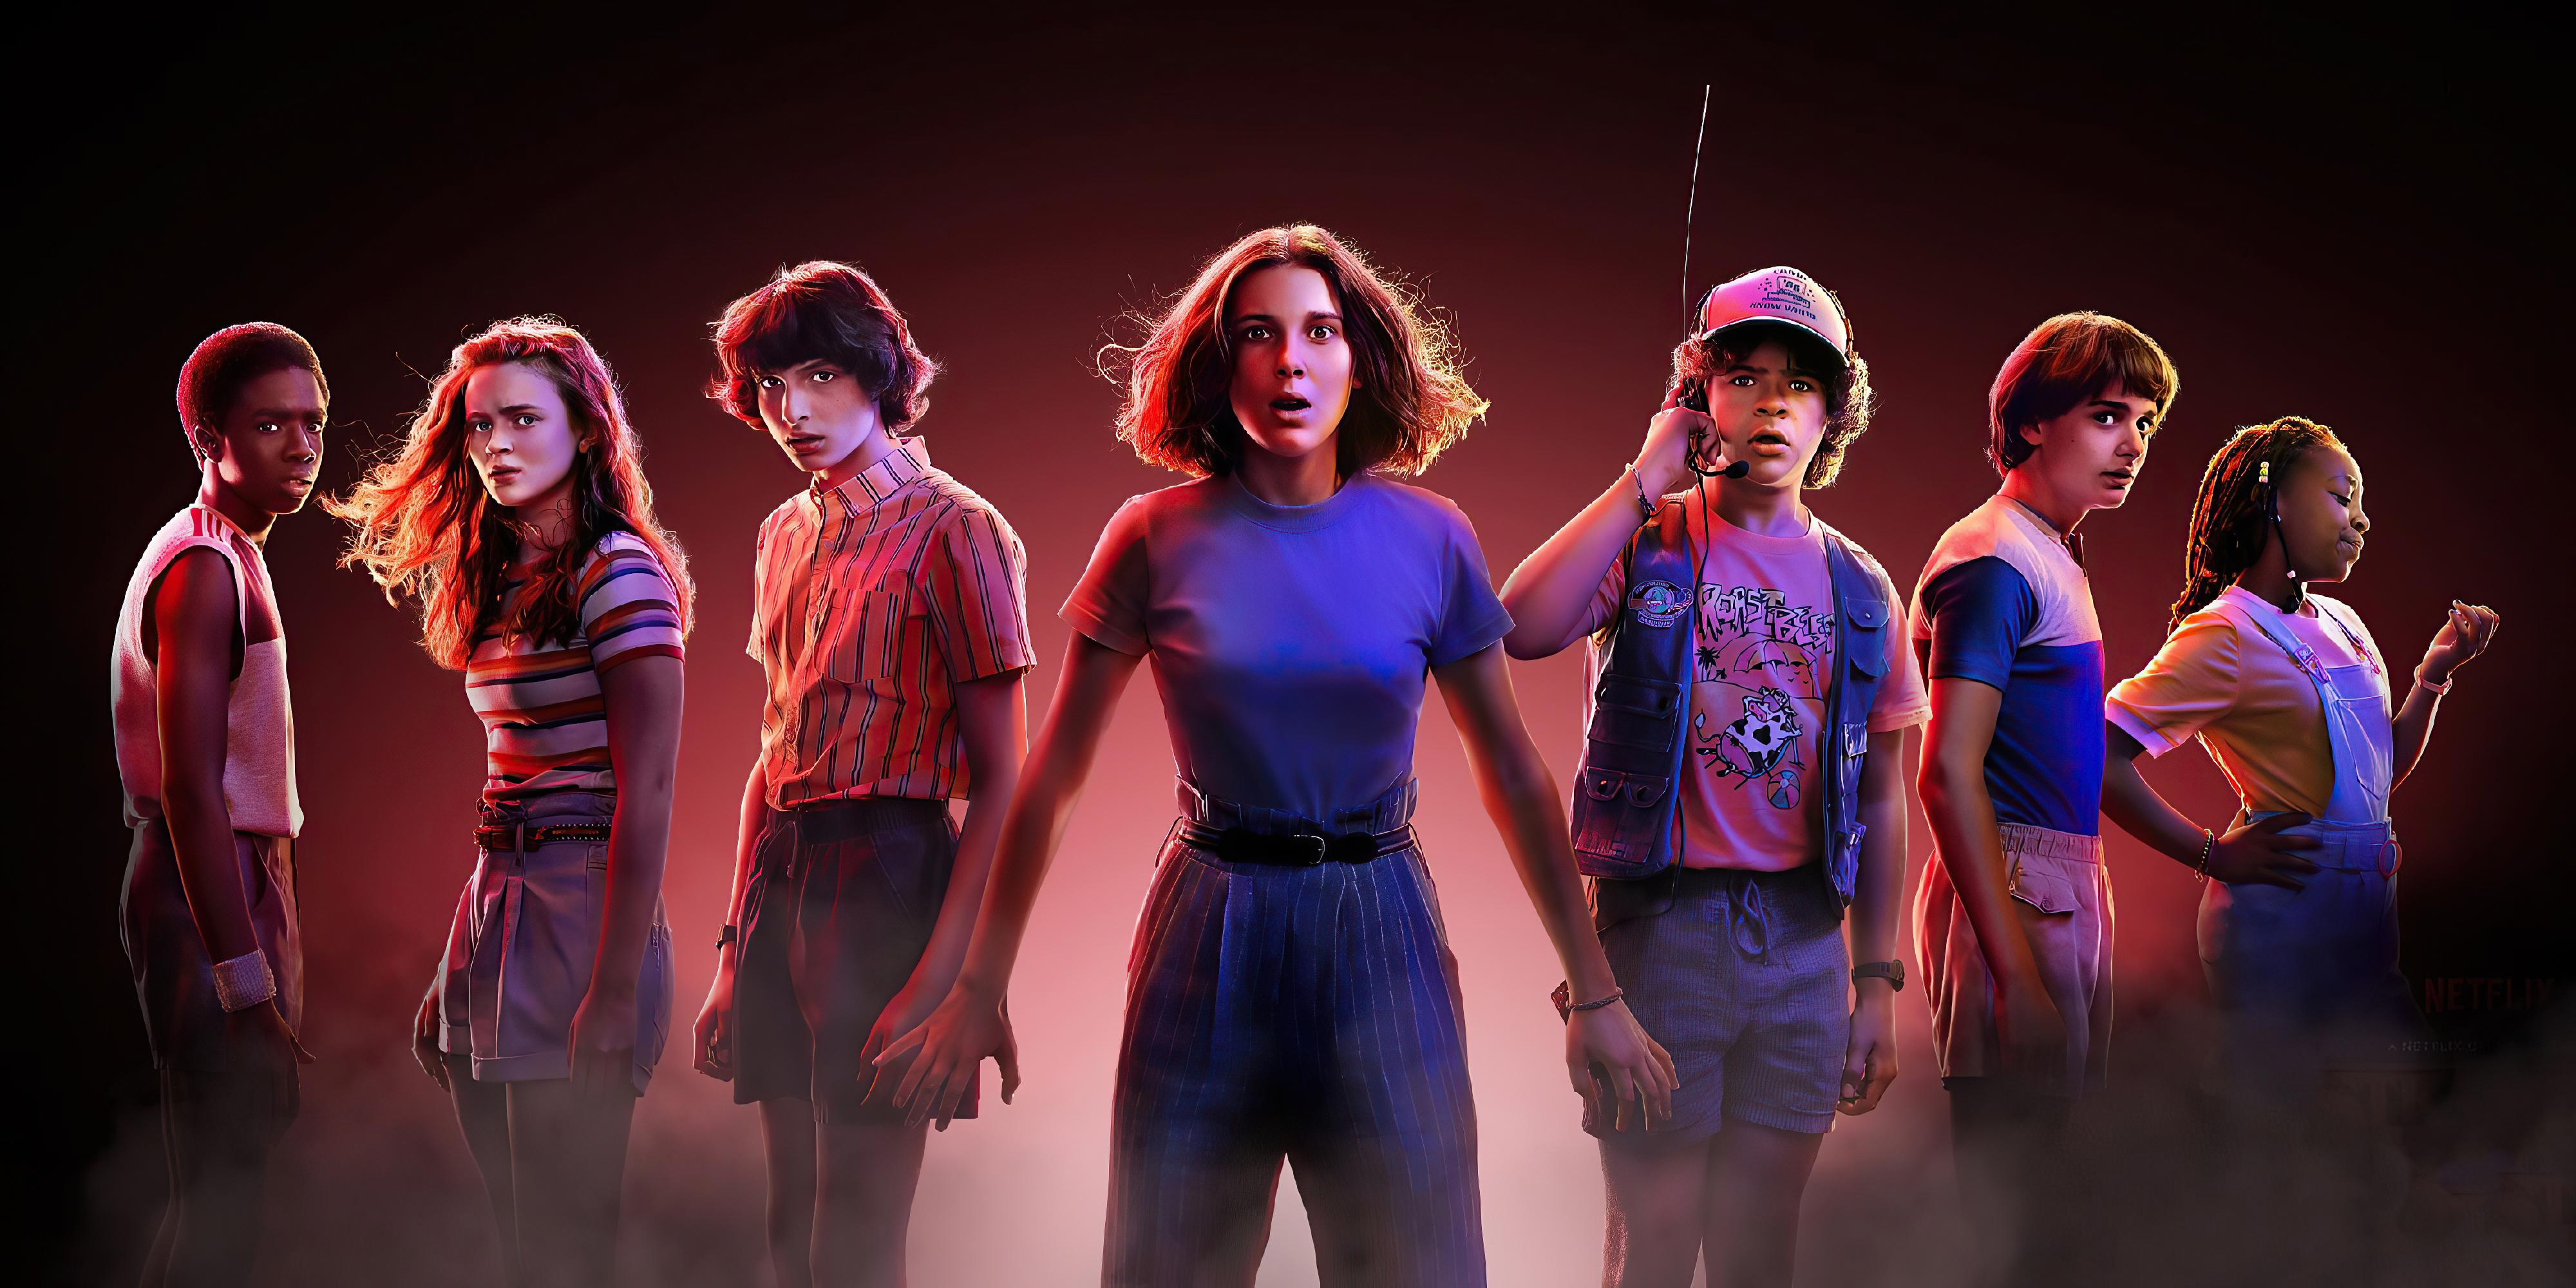 4000 x 2000 · jpeg - Stranger Things 2020, HD Tv Shows, 4k Wallpapers, Images, Backgrounds ...